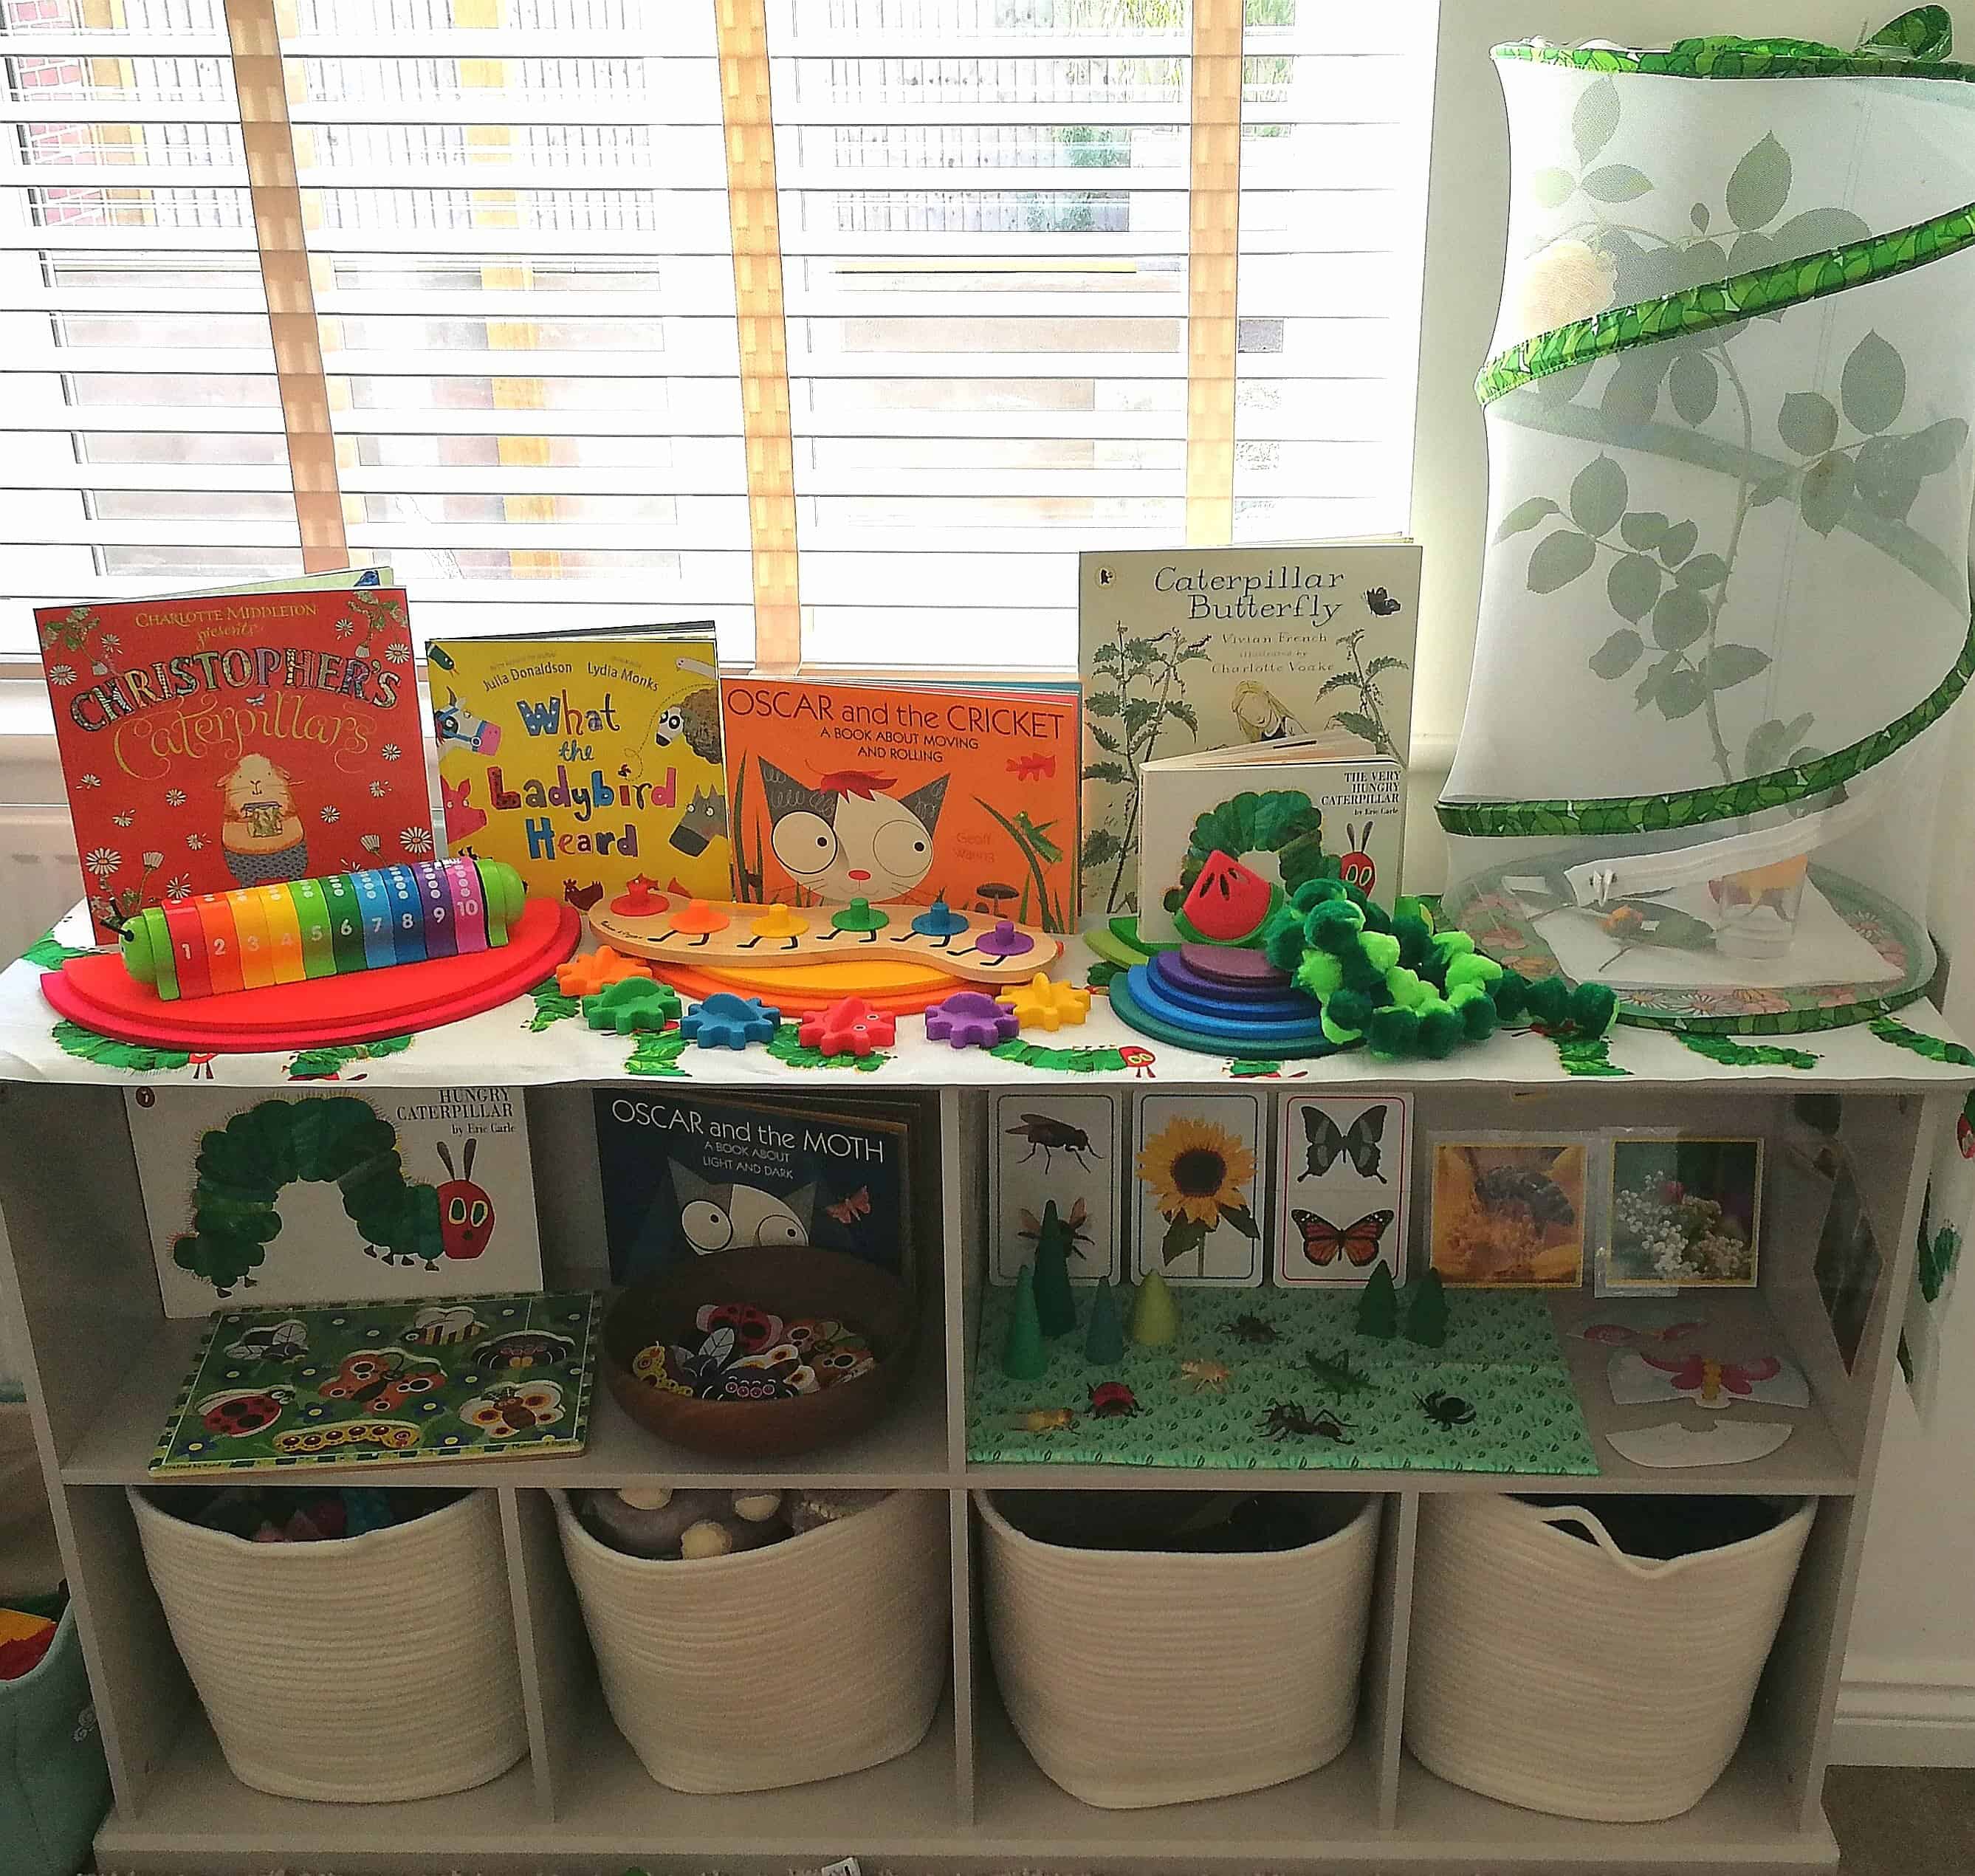 Shelfie - Theme - Minibeasts - Insects - Animals - Caterpillars - Butterflies - Moths - Matching - Communication and Language - Fine Motor Skills - Puzzles - Games - Toddler ideas - Preschooler - Books - Small World - Grimms Toys - Wooden Toys